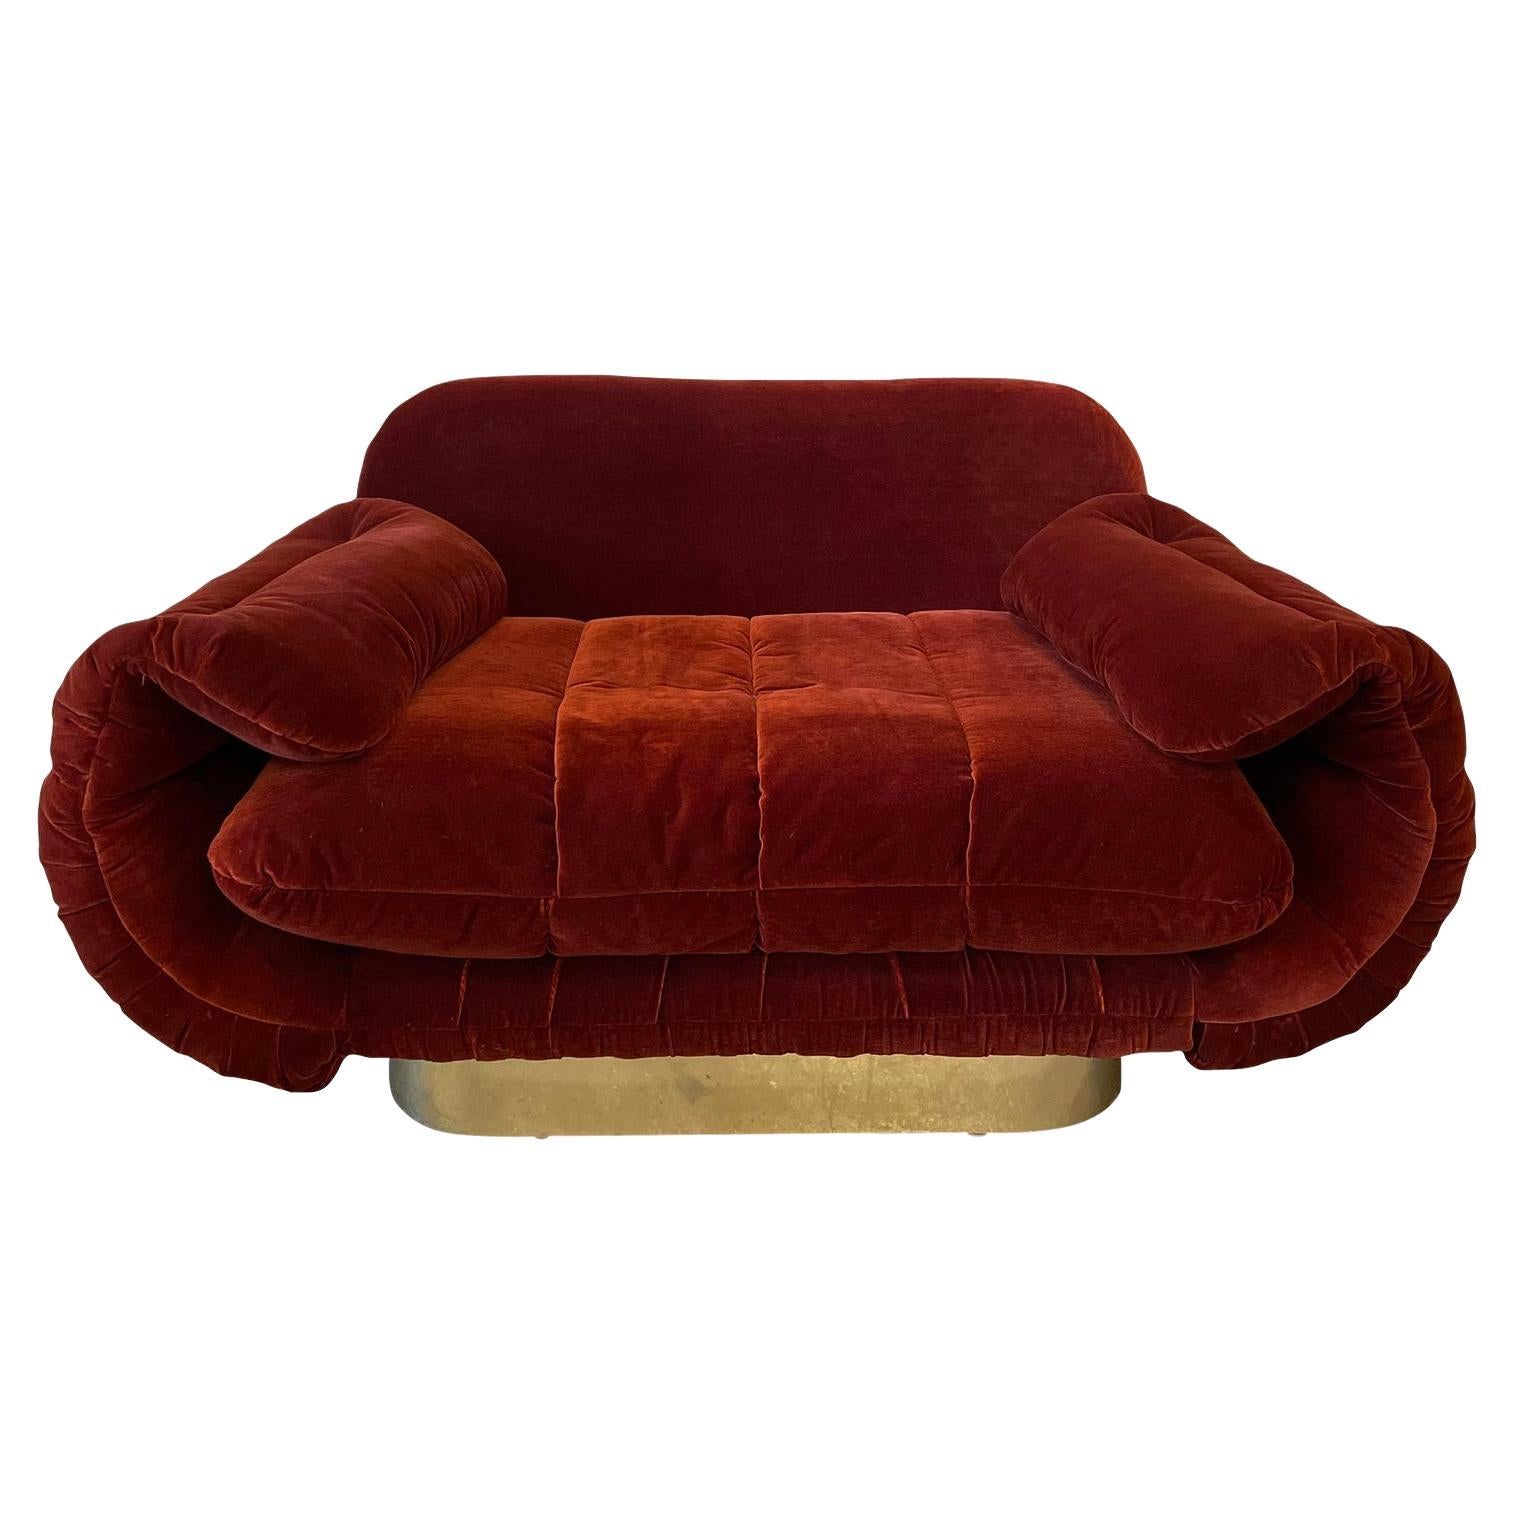 1970s Red Loveseat with Curved Arms & Brass Plinth Base